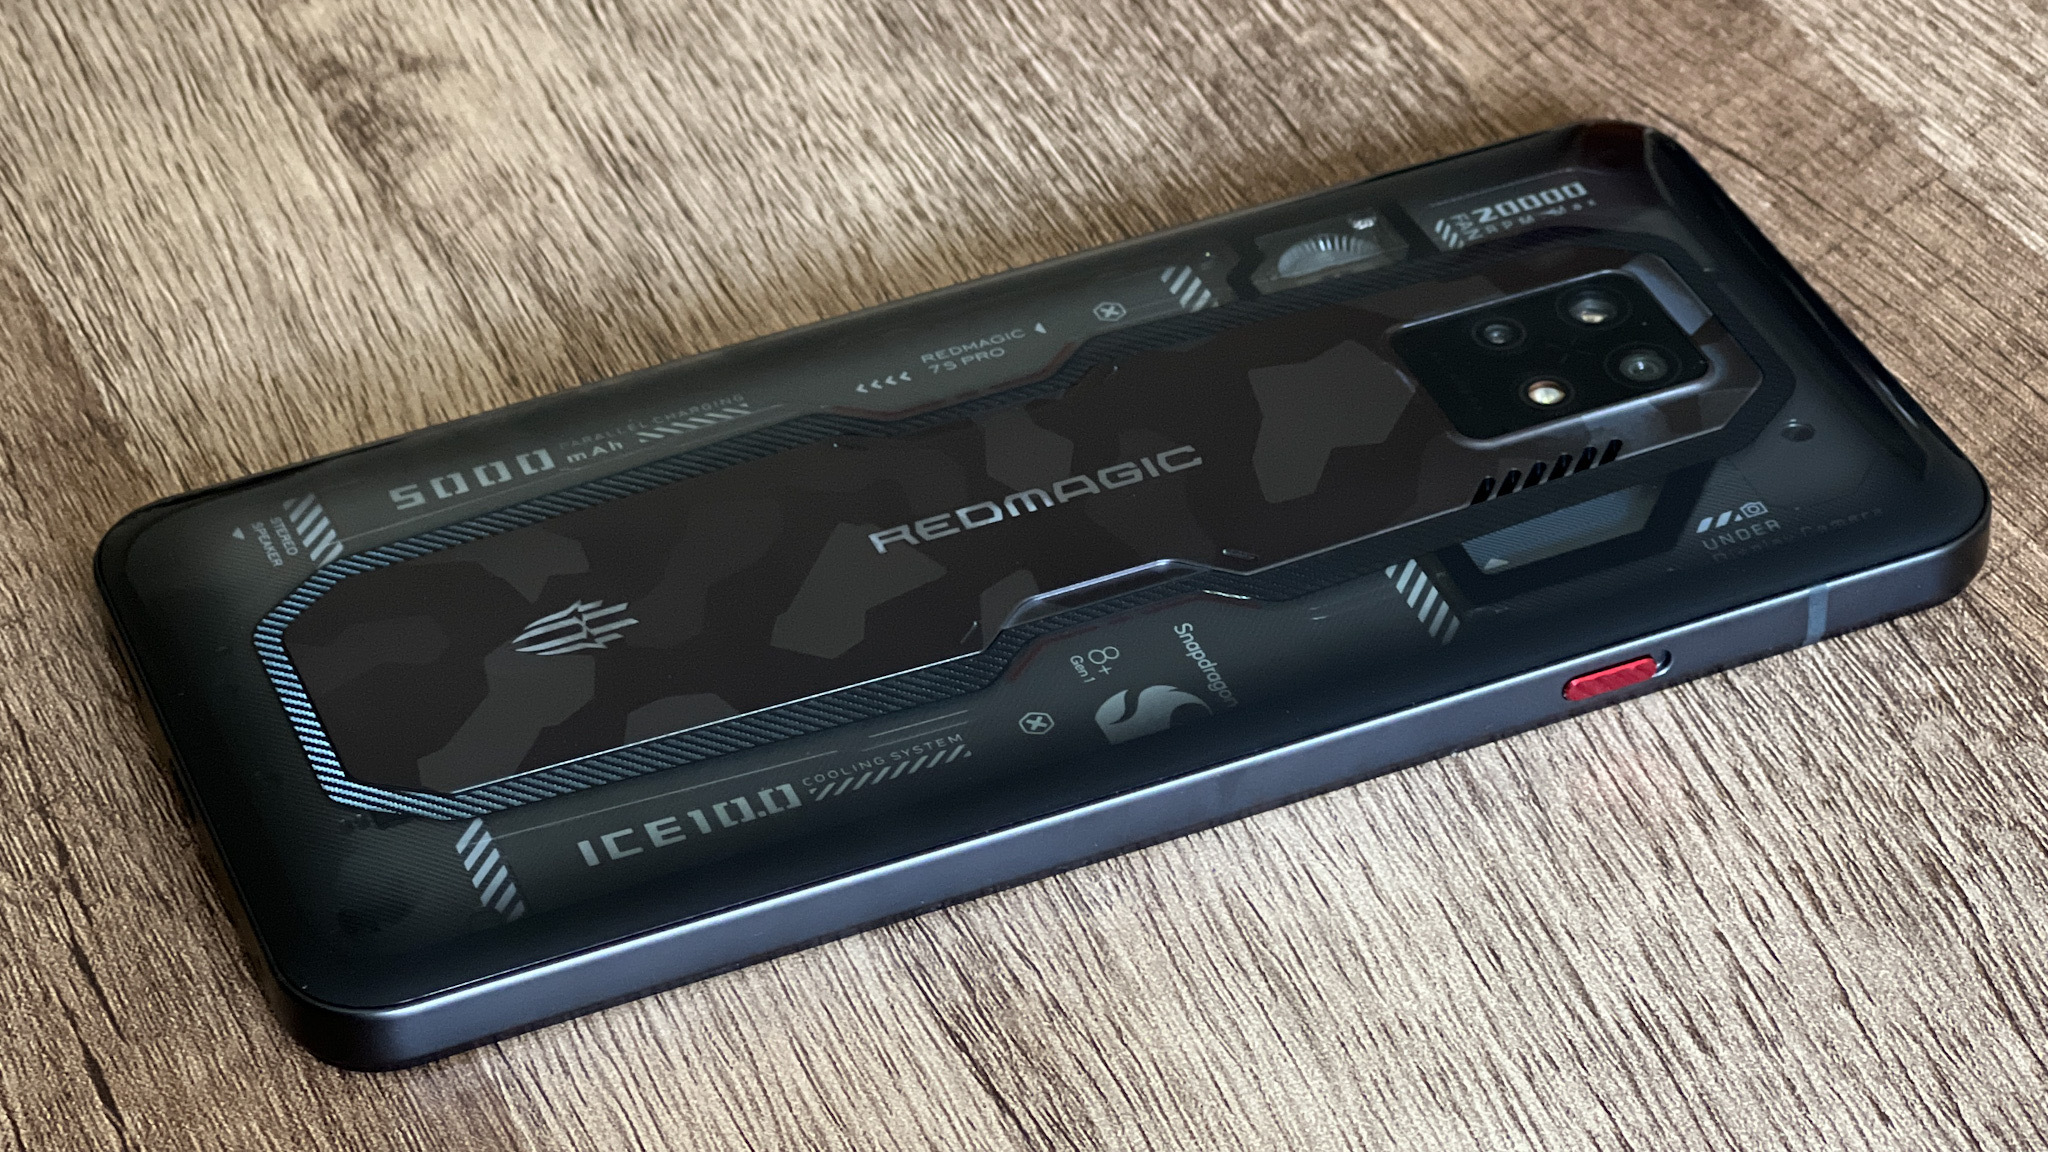 Nubia Red Magic 7 review: great for gaming, but with a big issue